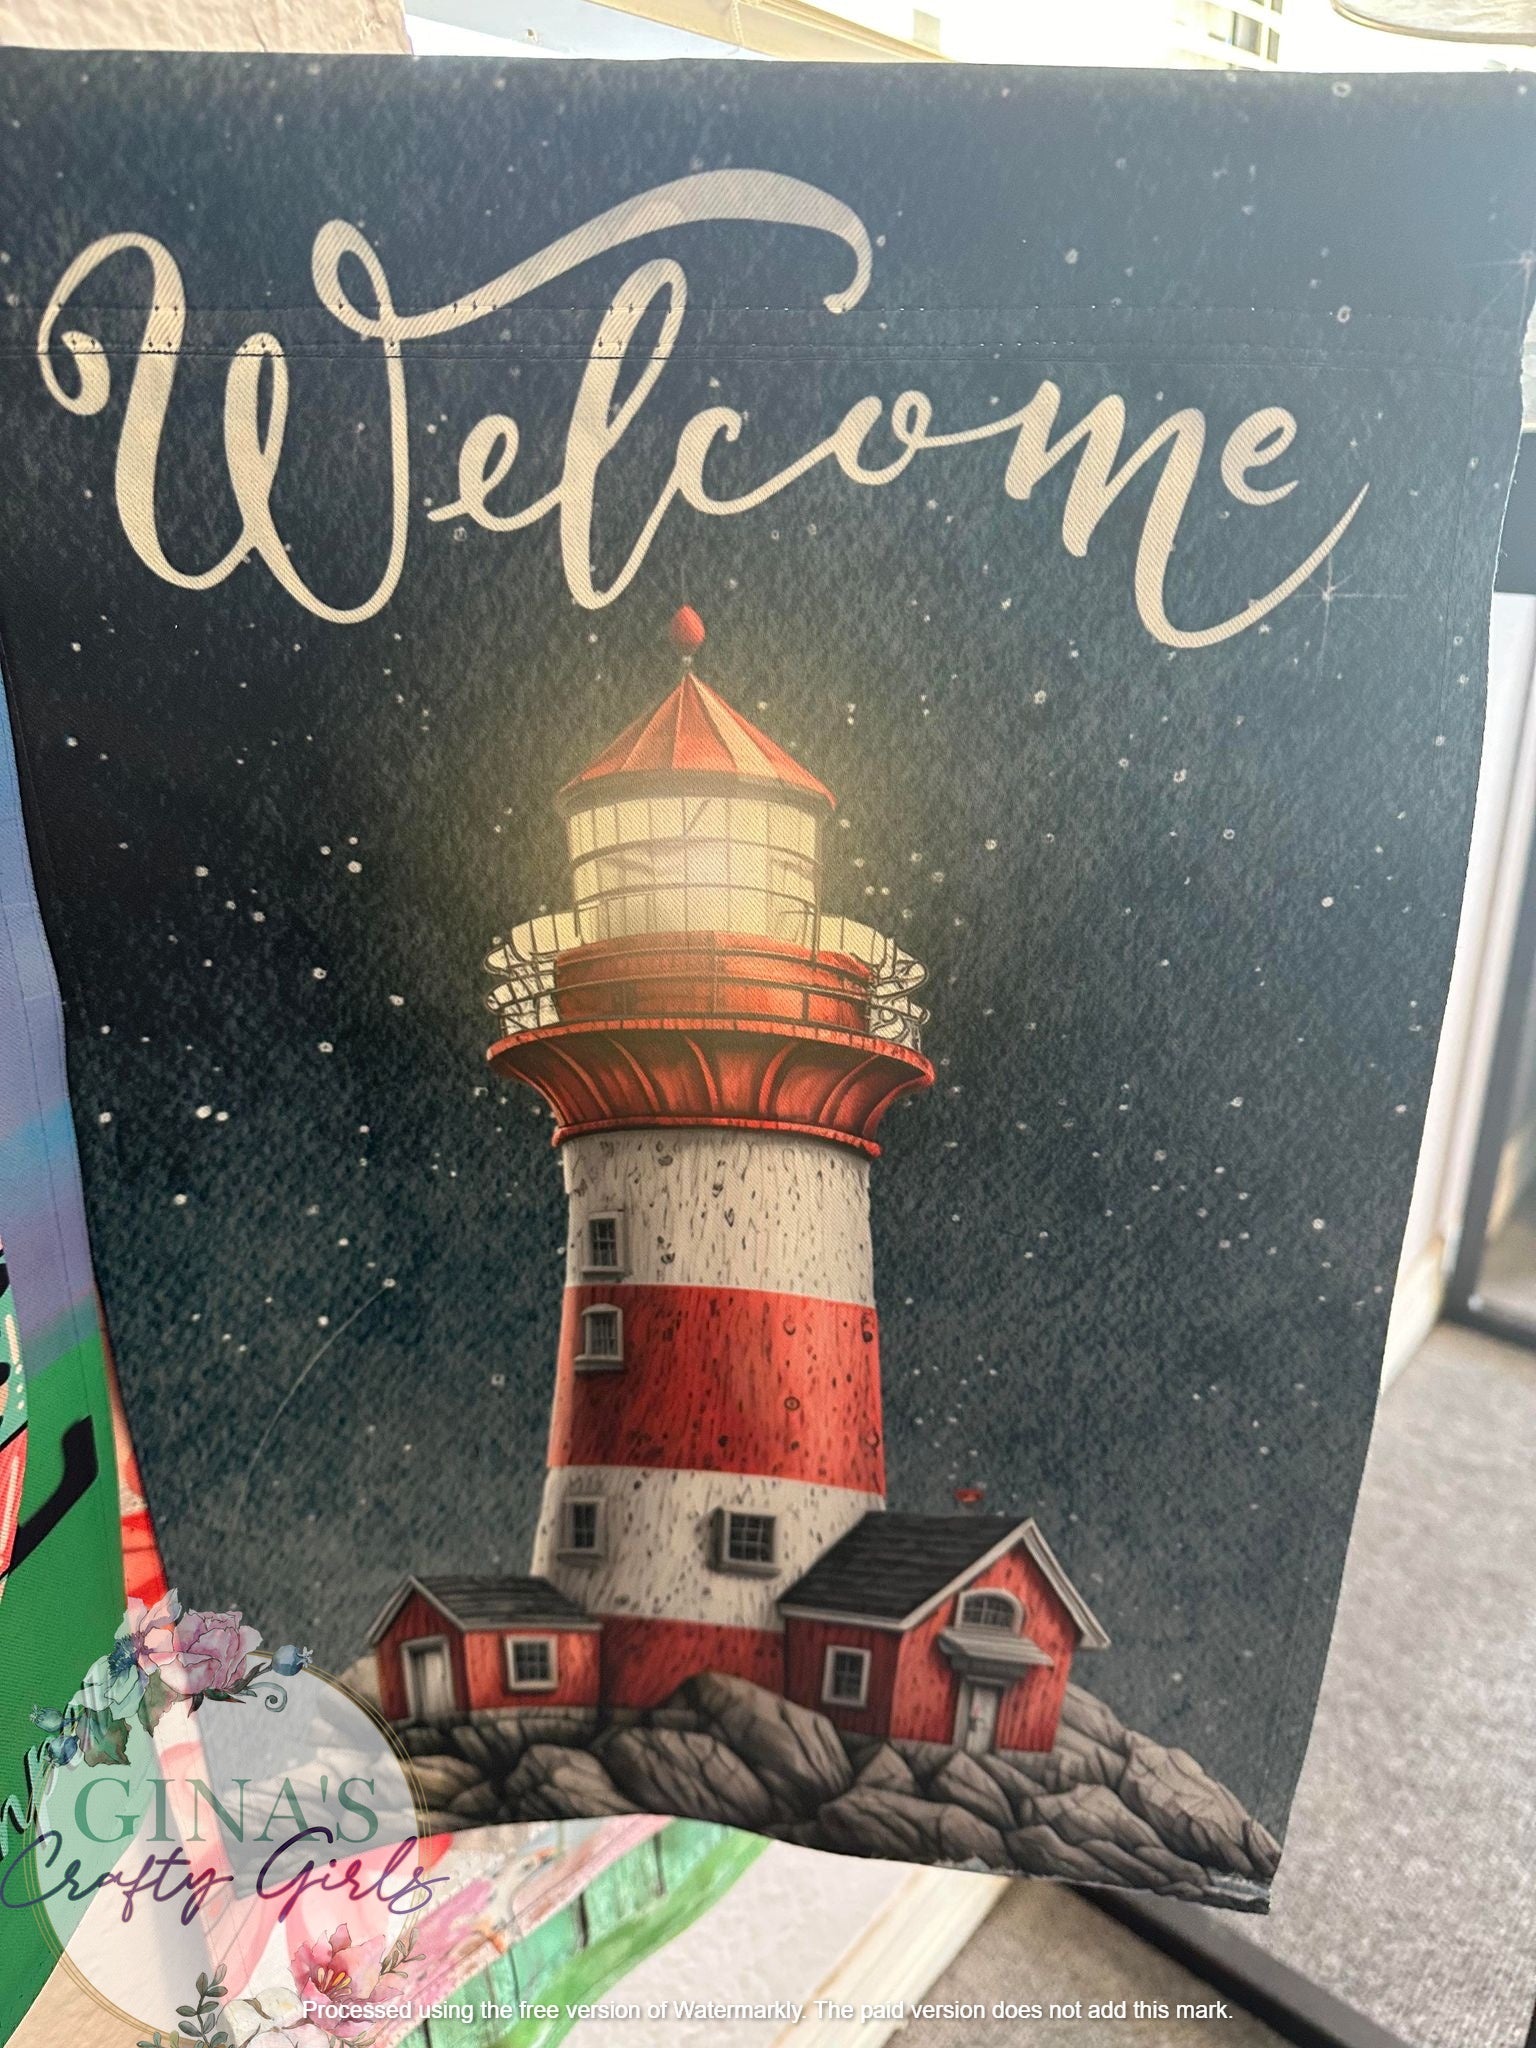 Welcome Lighthouse 12 x18 Double Sided Garden Flag